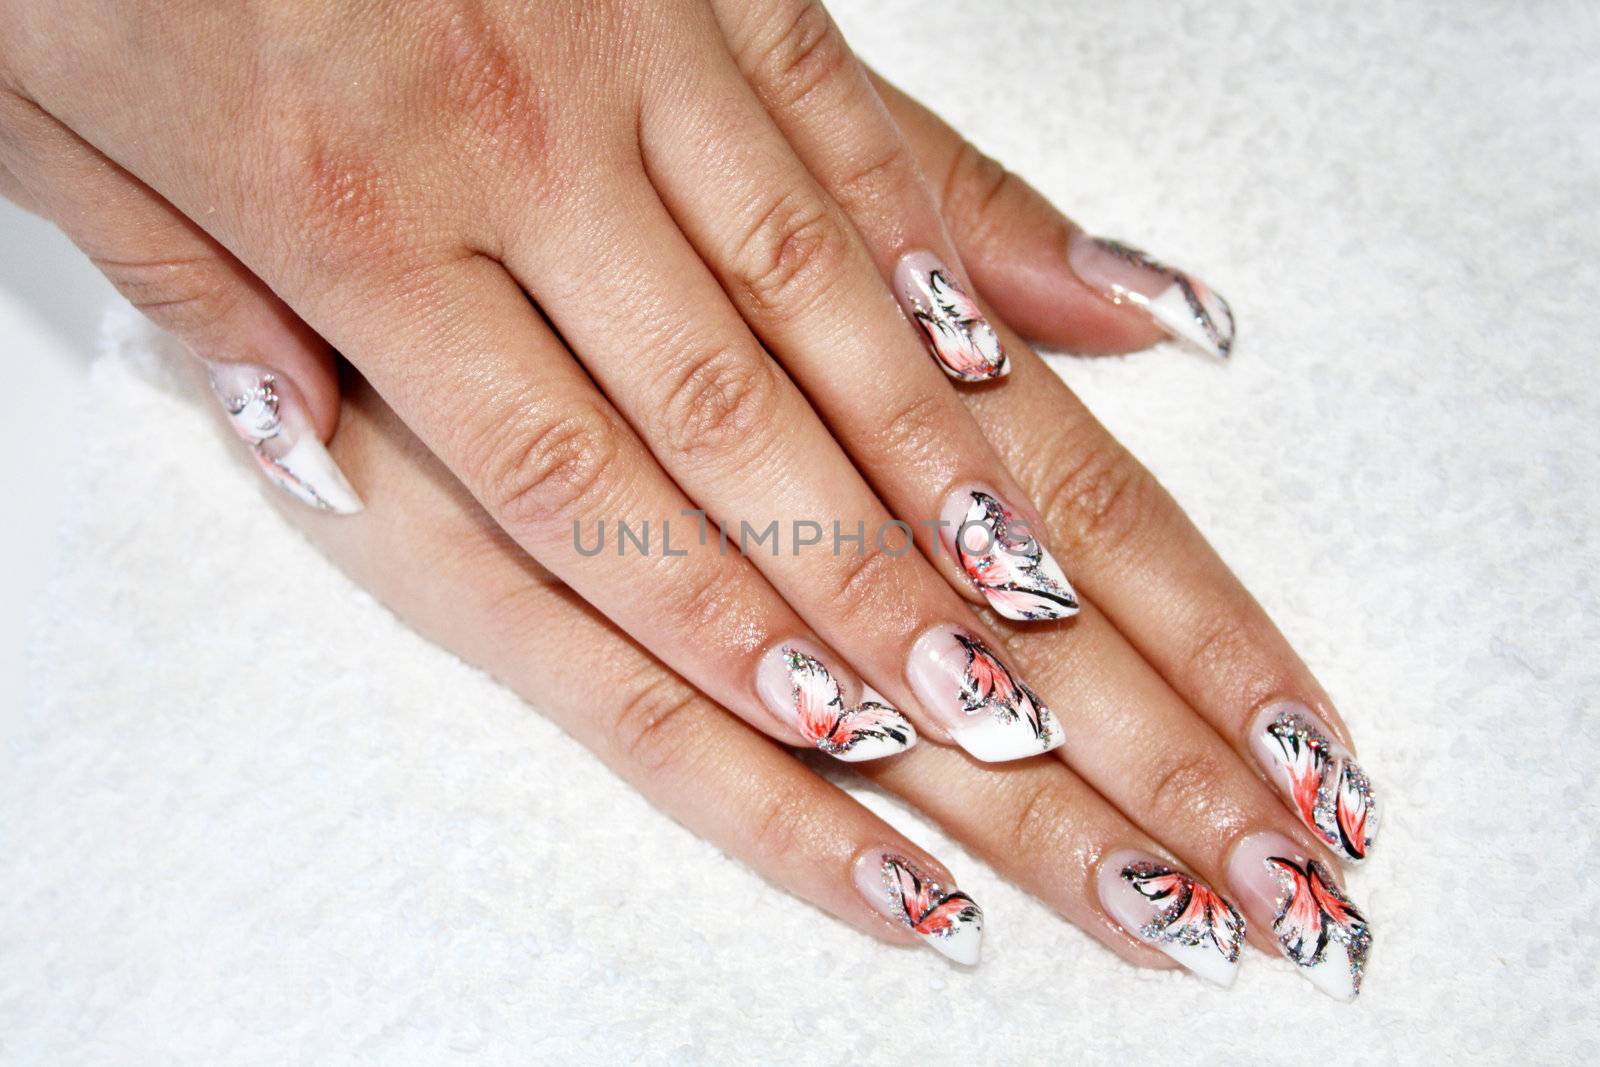 nails design by photochecker